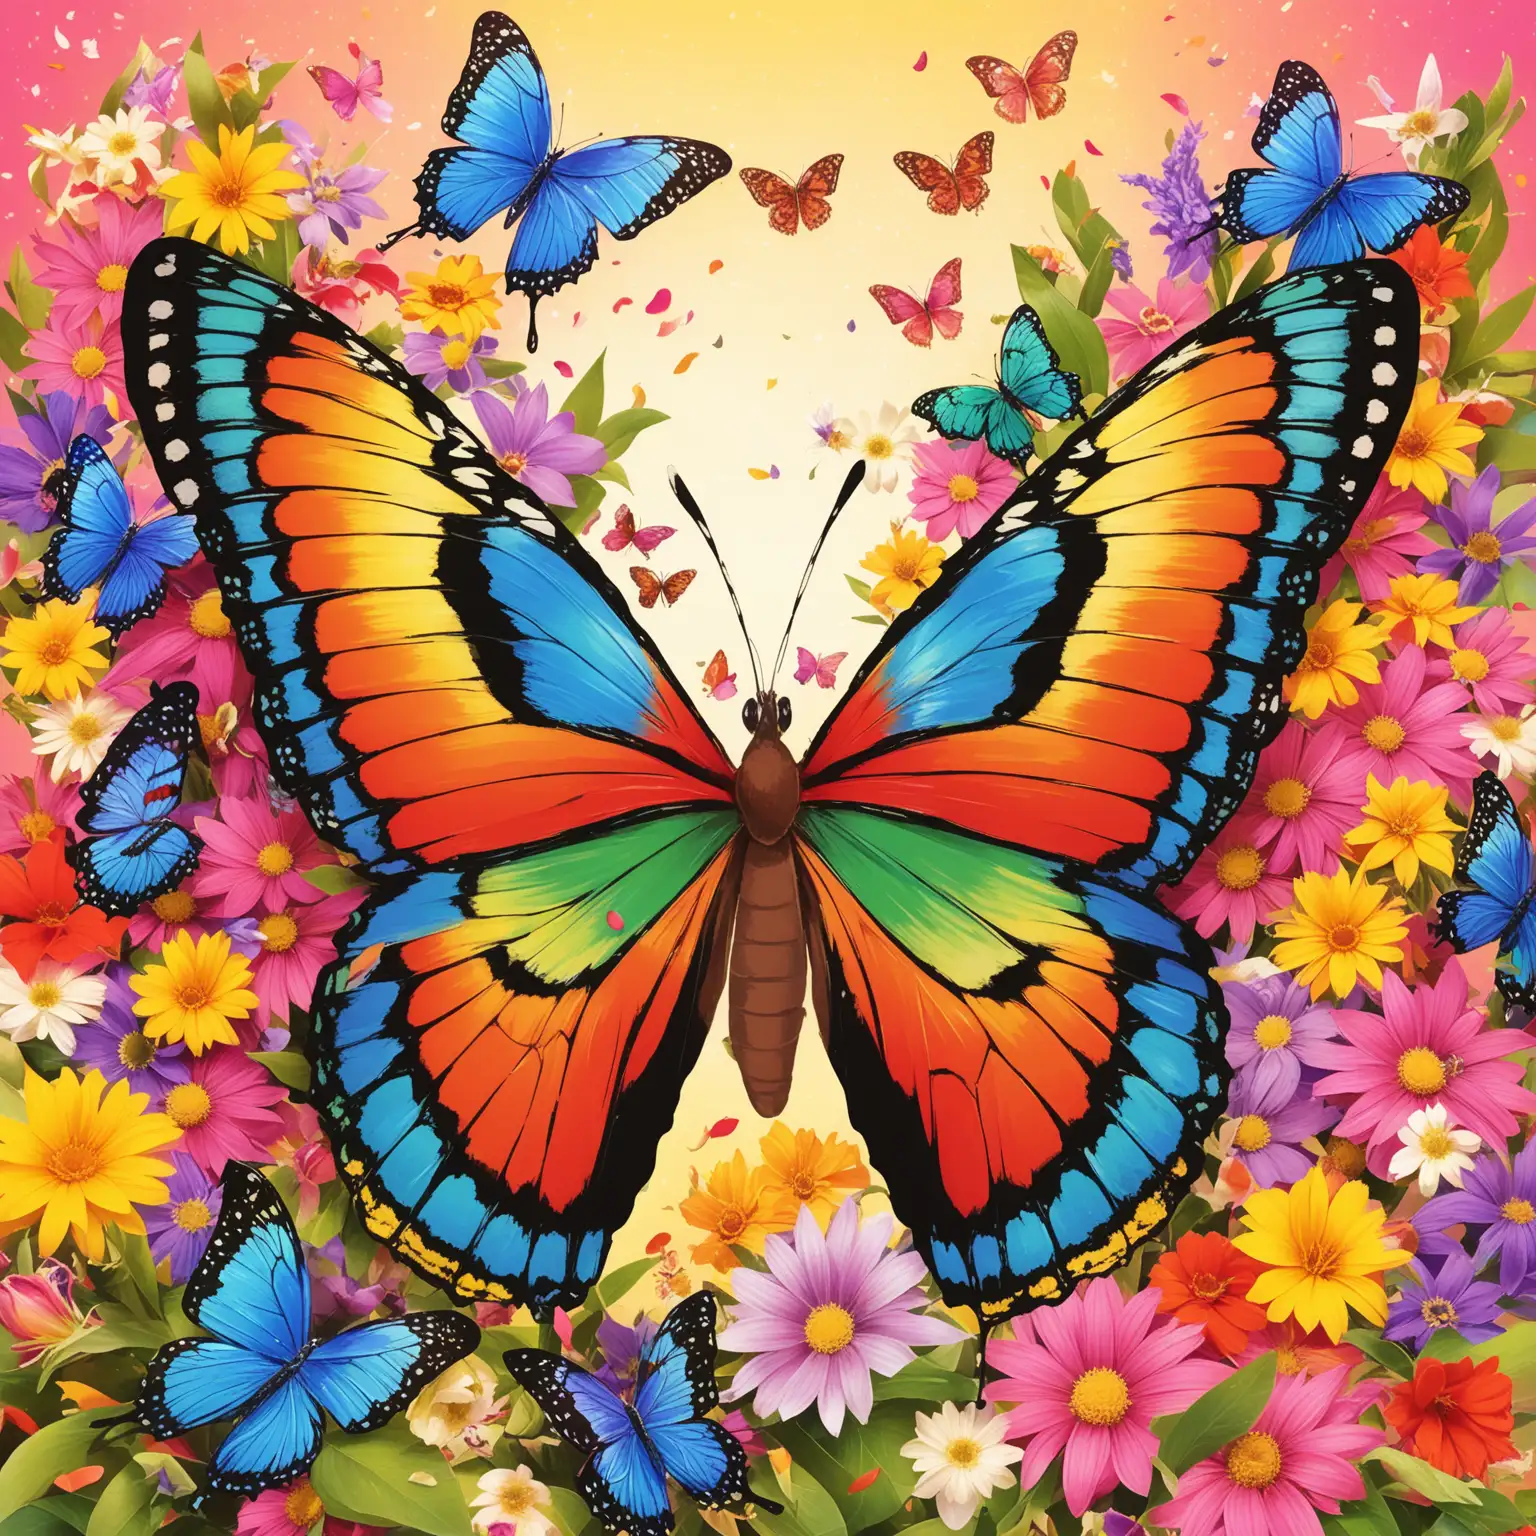 Vibrant Madagascar Butterfly Wings Amid Floral Bouquet Background